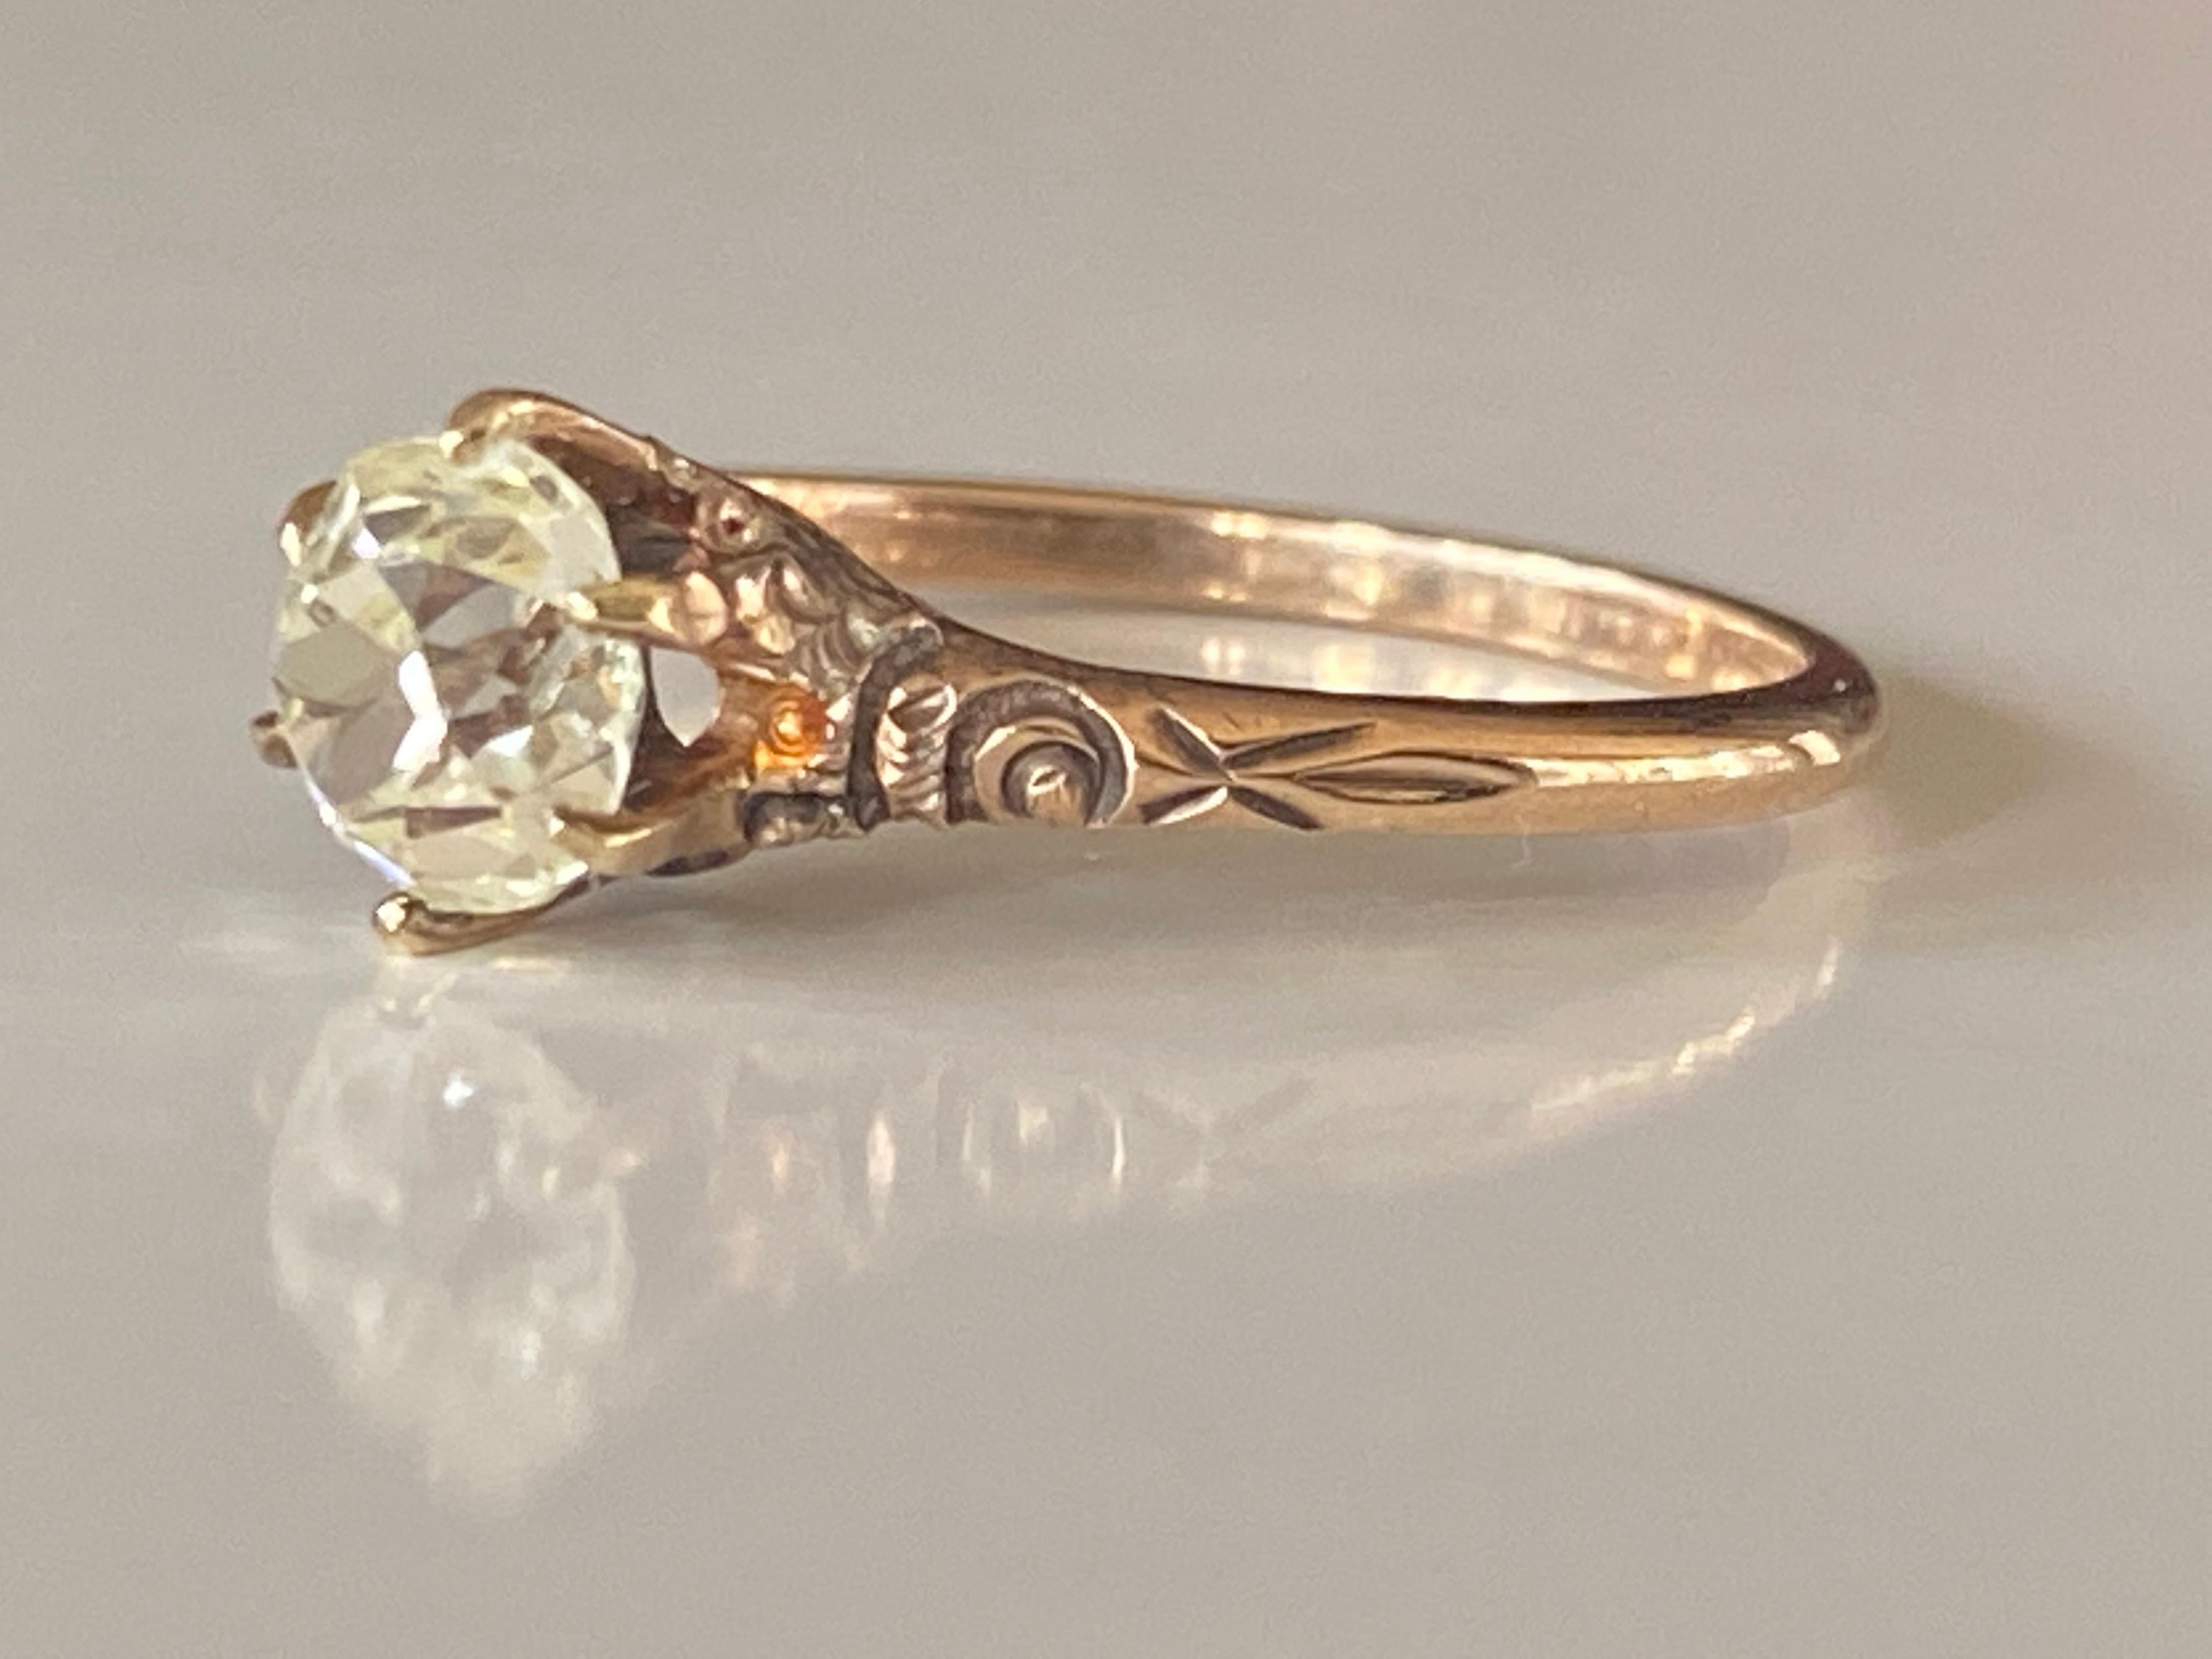 Crafted in 9kt yellow gold, this stunning antique Edwardian era ring is designed around a shimmering Old Mine cut center stone measuring approximately 1.10 carat, K-L color, SI2 clarity with delicate piercing. Circa 1900-1910. 
